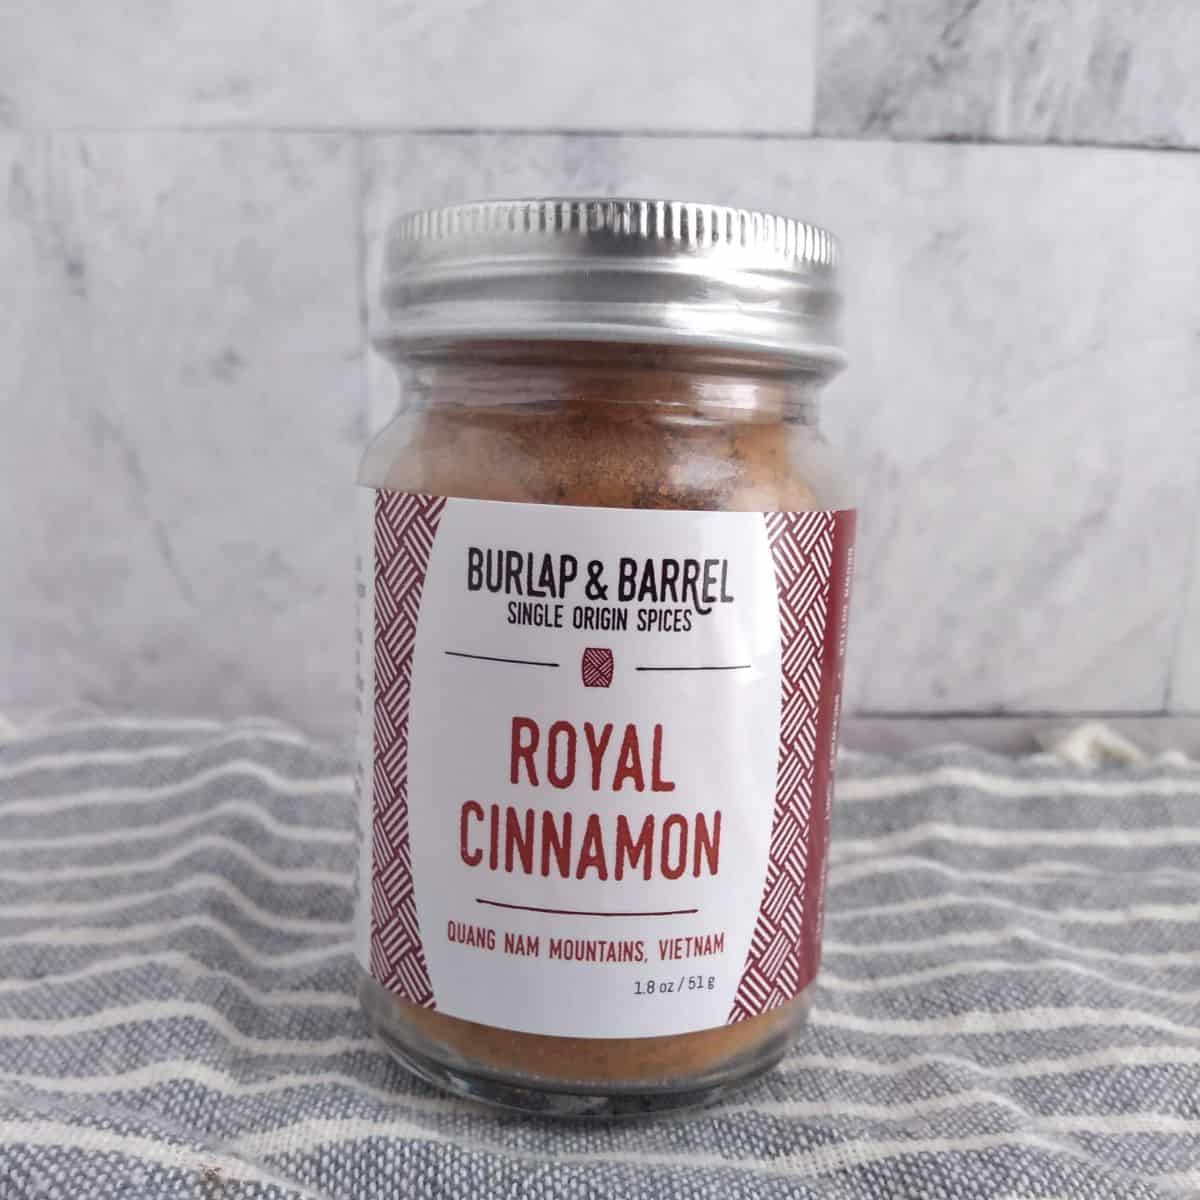 A jar of Burlap & Barrel Royal Cinnamon on a towel in front of a tile background.